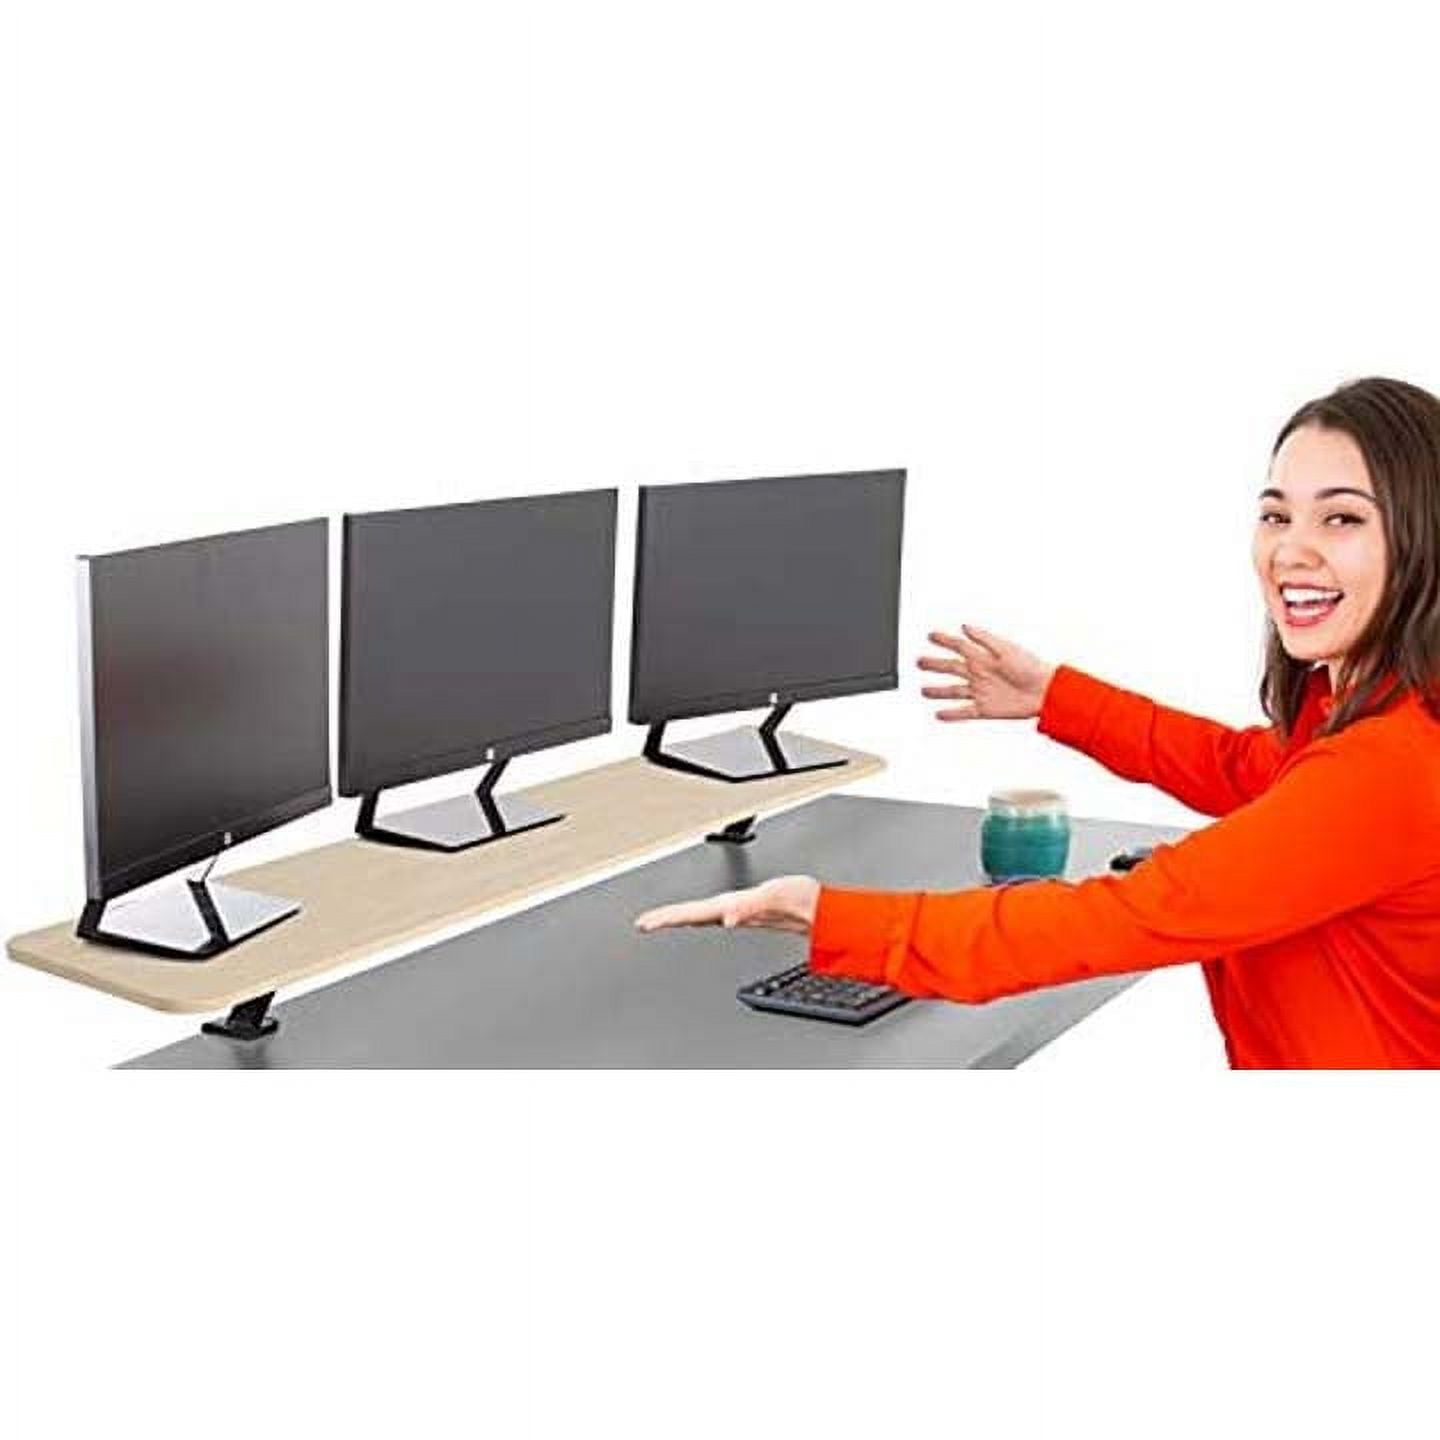 DTS1000 Height Adjustable Monitor Stand